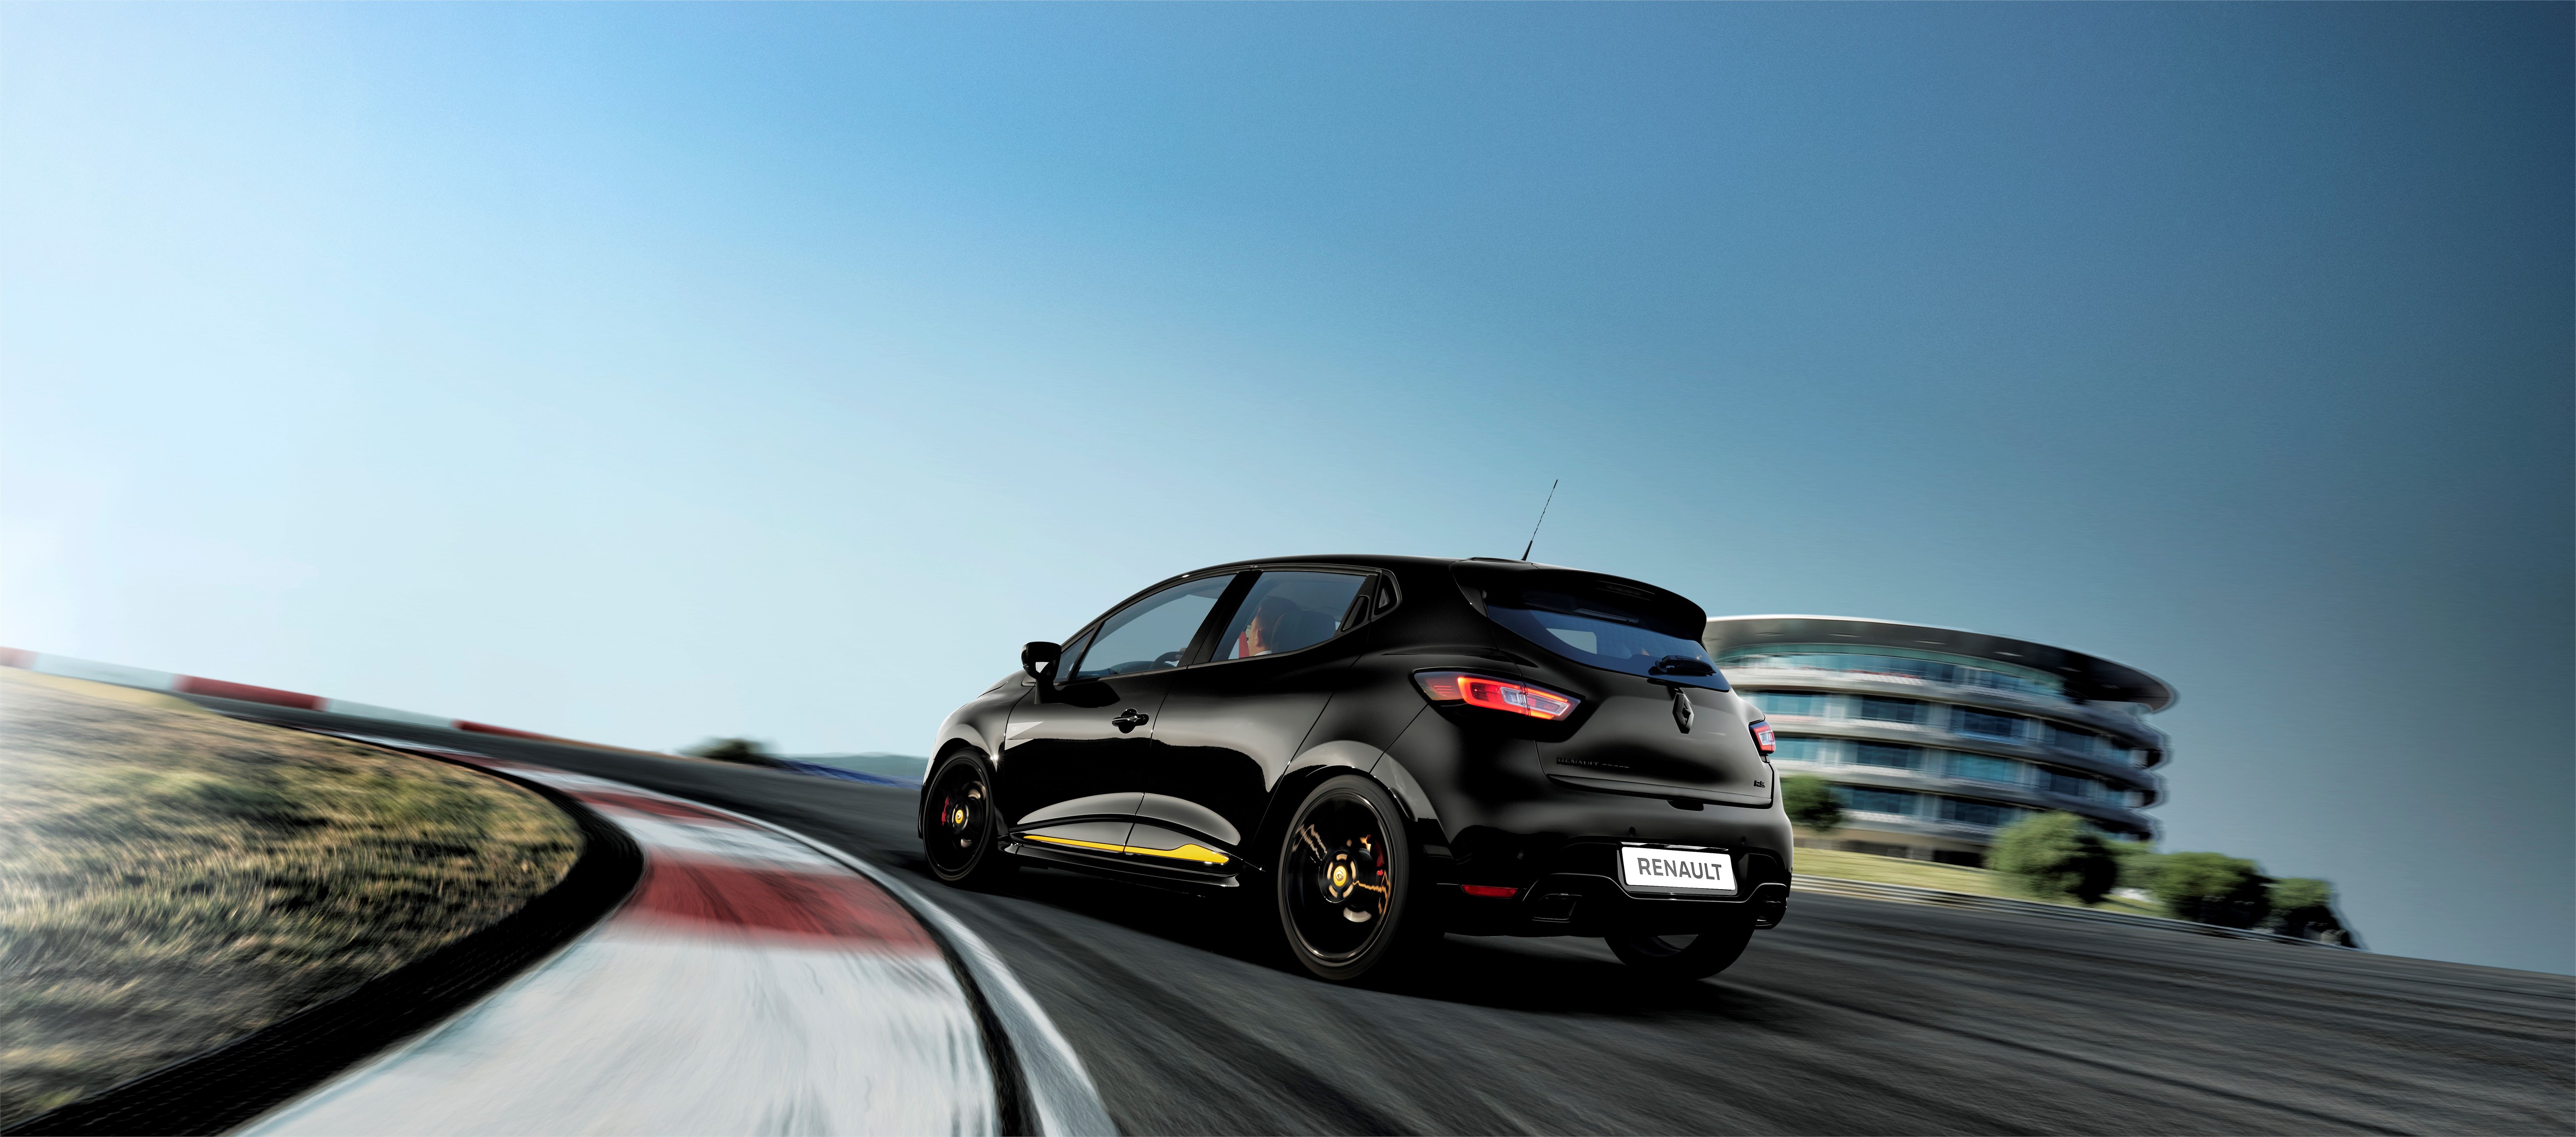 Renault Clio R.S. exterior restyling